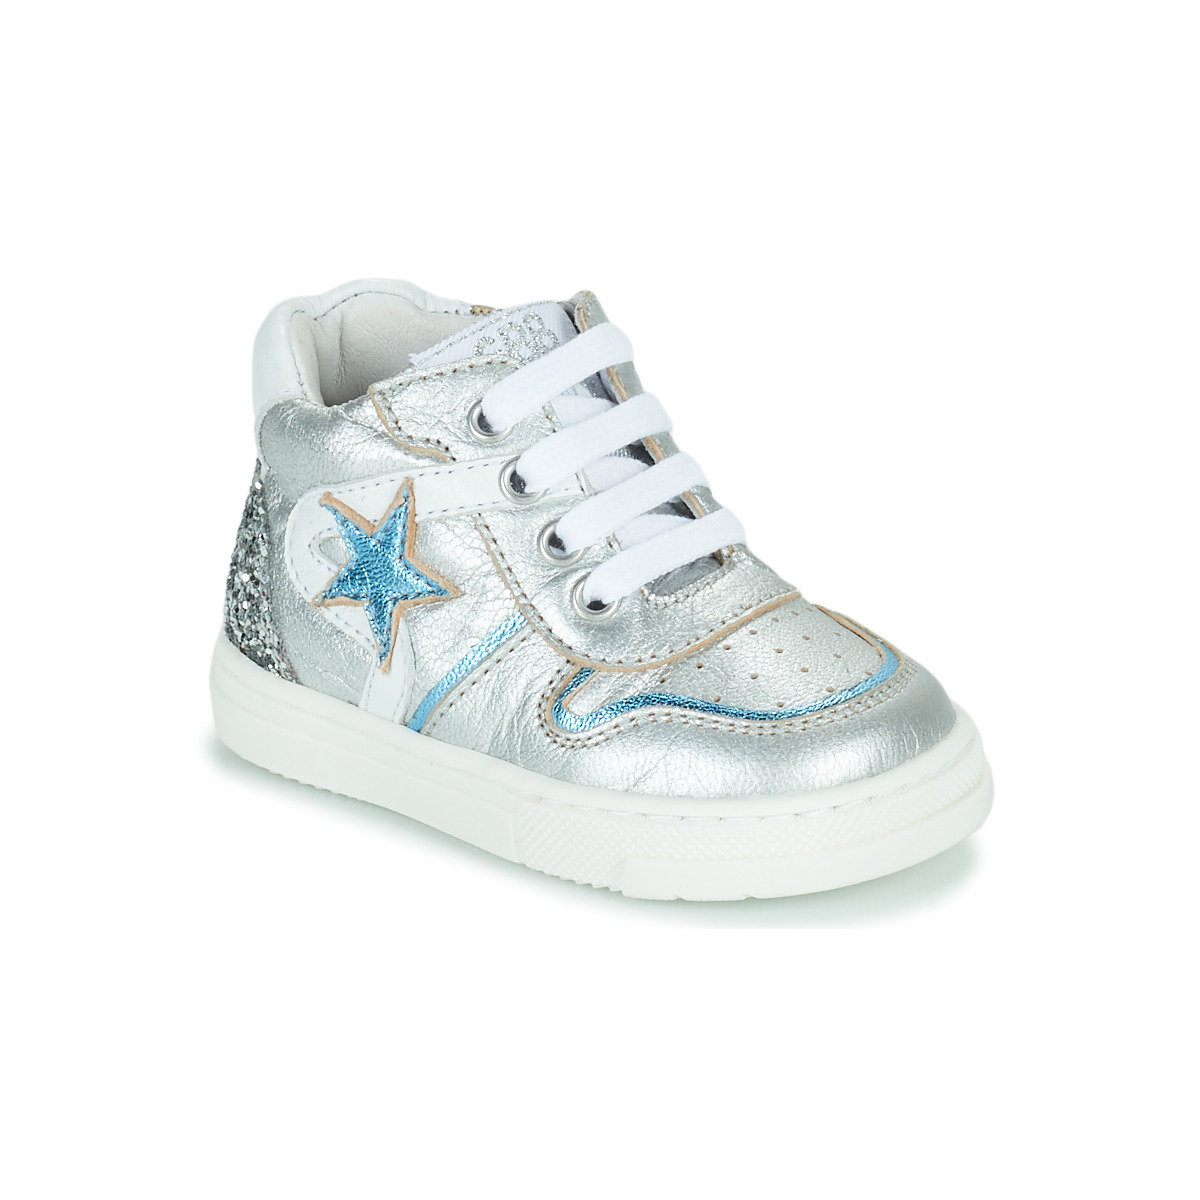 Shoes Girl High top trainers GBB LAMANE Silver